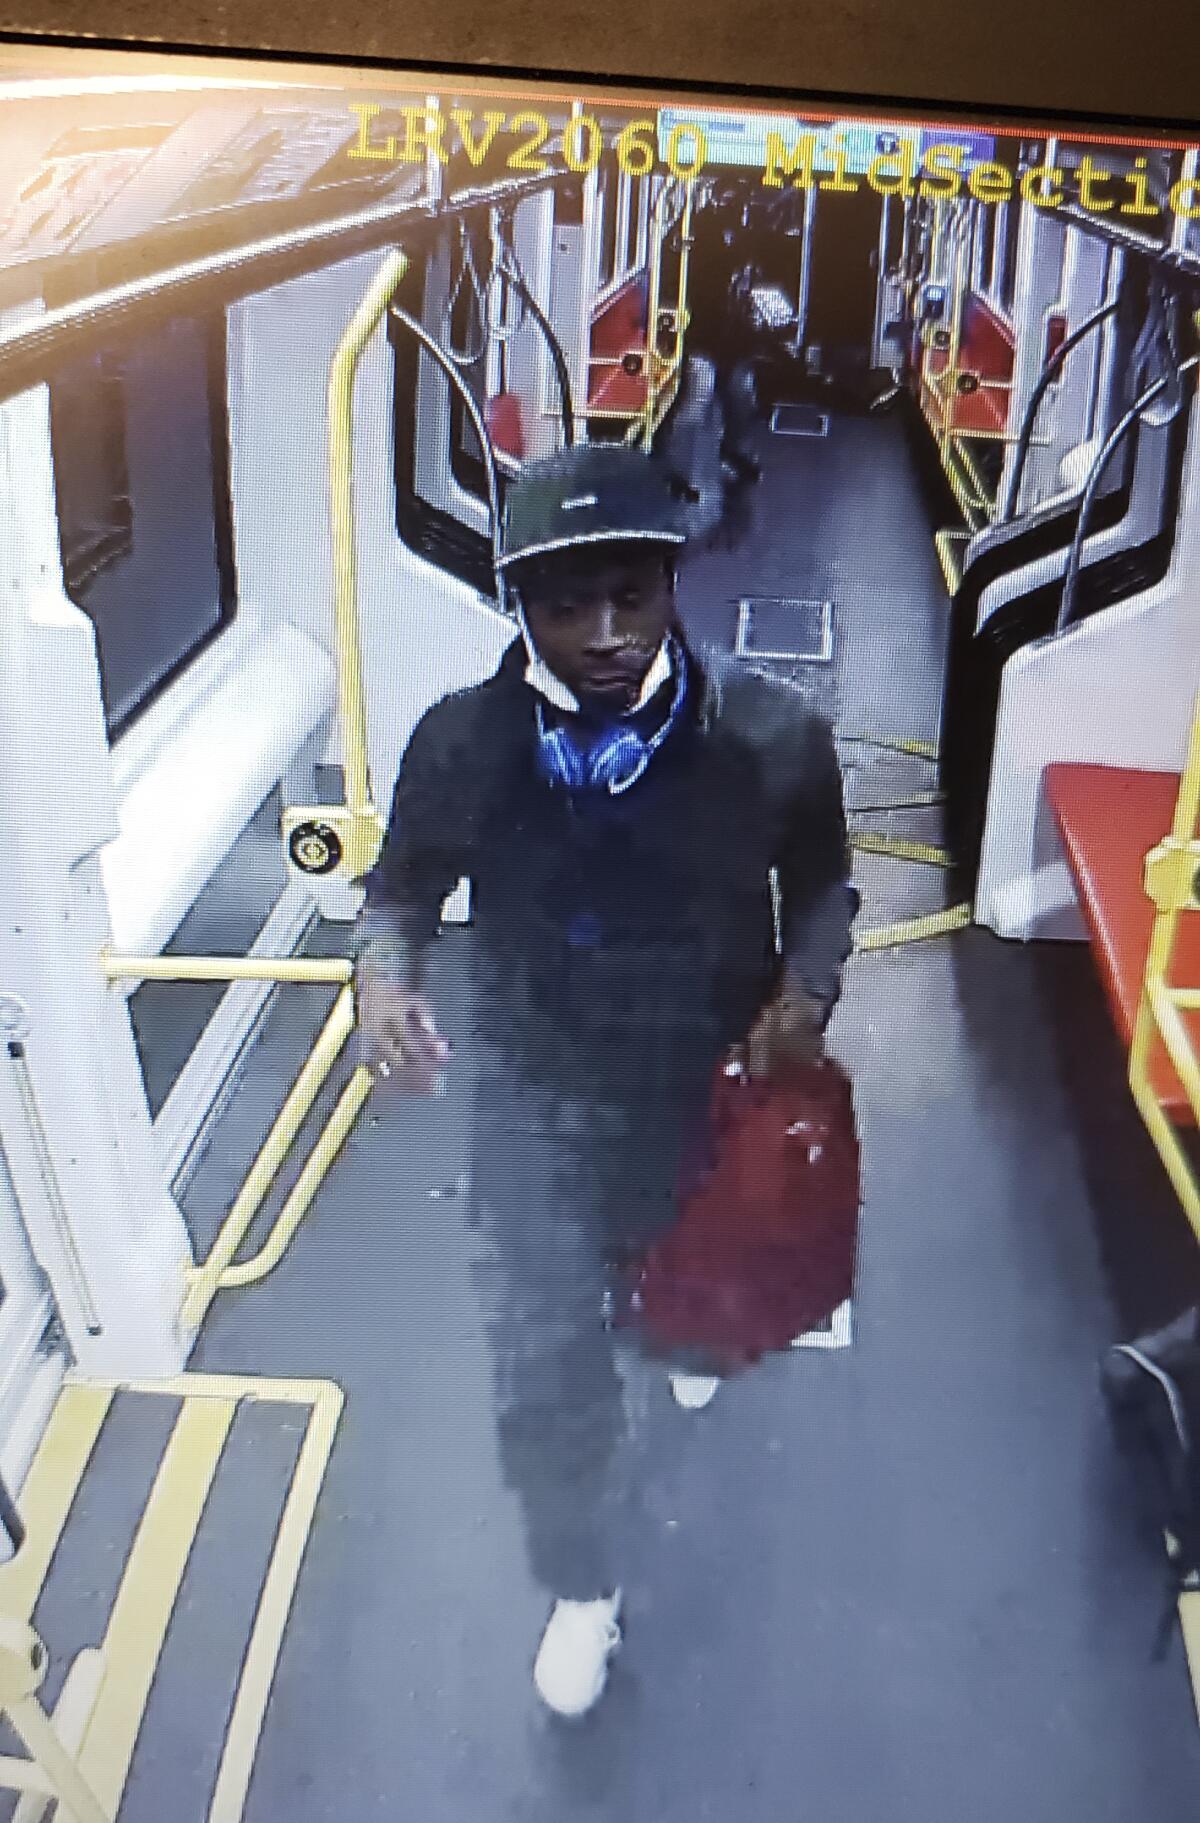 FILE - In this image from video released by the San Francisco Police Department is person of interest Javon Green following a shooting on a Muni Metro train in San Francisco, Wednesday, June 22, 2022. San Francisco police say Green, who allegedly shot and killed a 27-year-old man and wounded a 70-year-old man on a San Francisco subway commuter train, has been arrested Thursday, June 23, 2022, in Pittsburg, a city about 40 miles (64 kilometers) east of San Francisco. (San Francisco Police Department via AP, File)